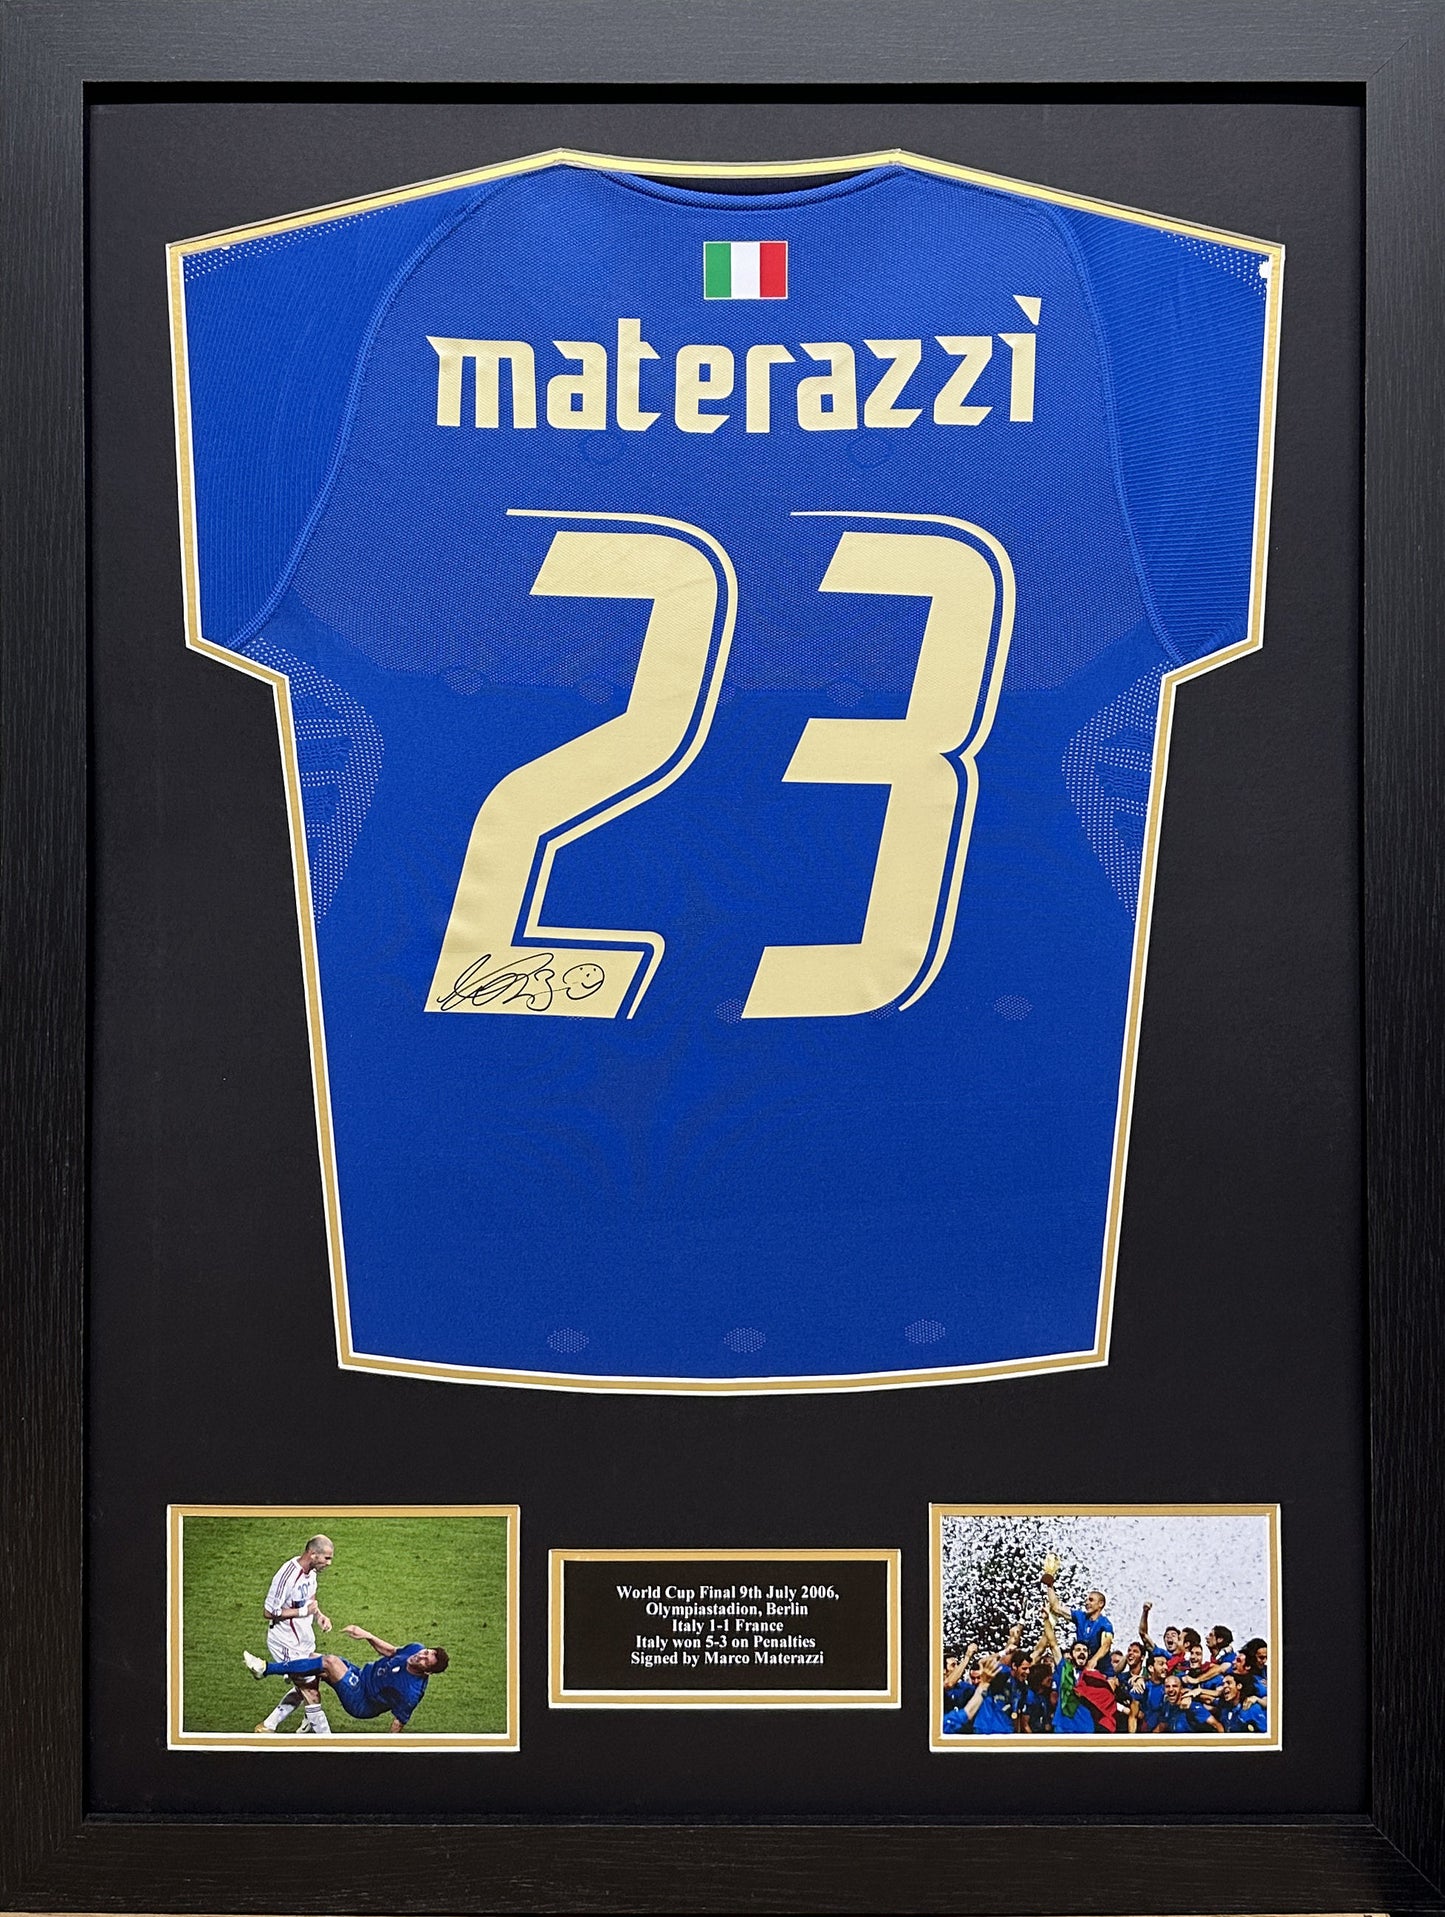 Marco Materazzi Signed Italy Shirt